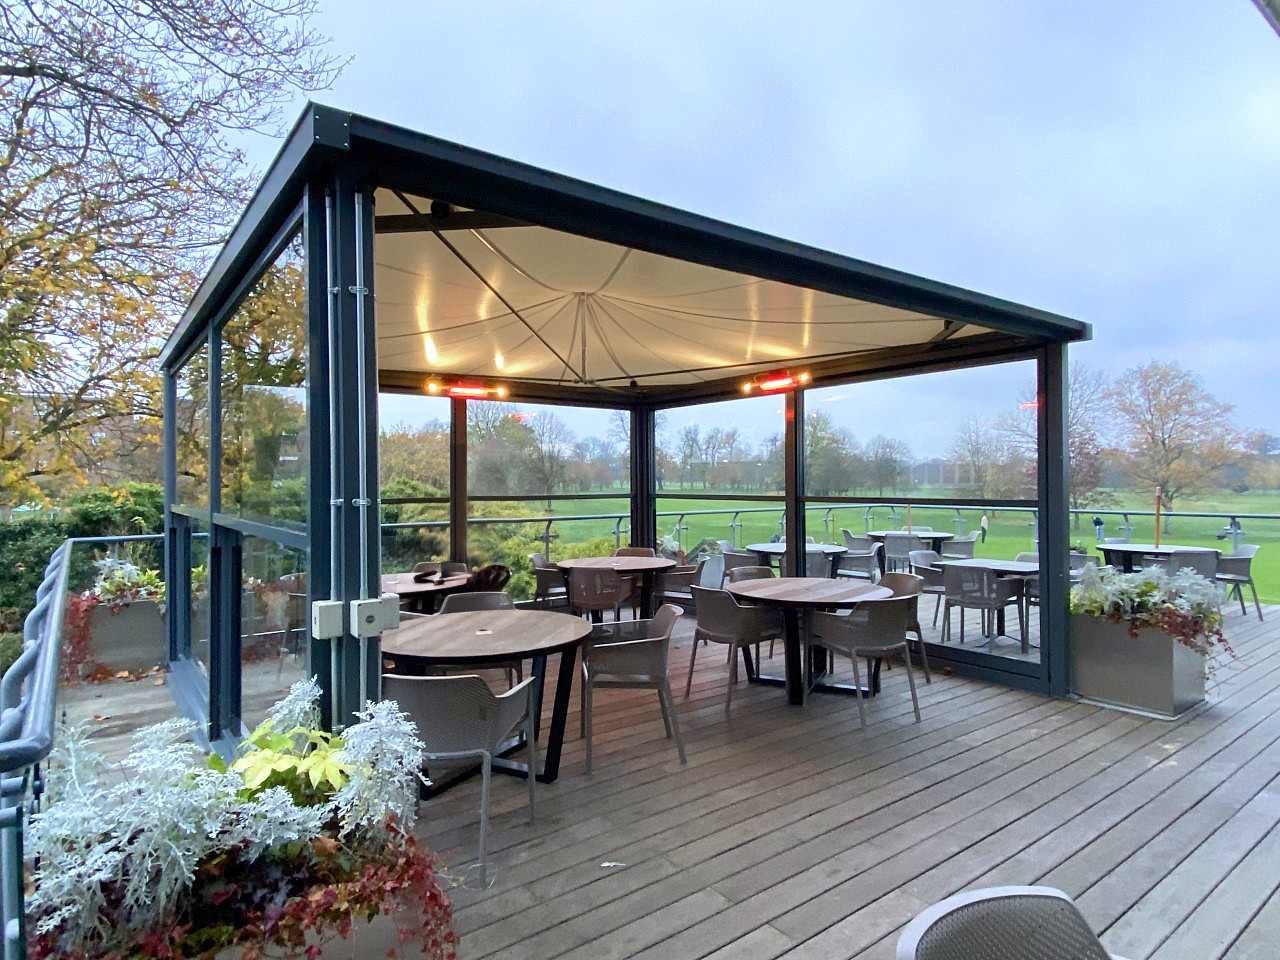 A heated canopy providing shelter for a golf club's outdoor dining area on a rainy day